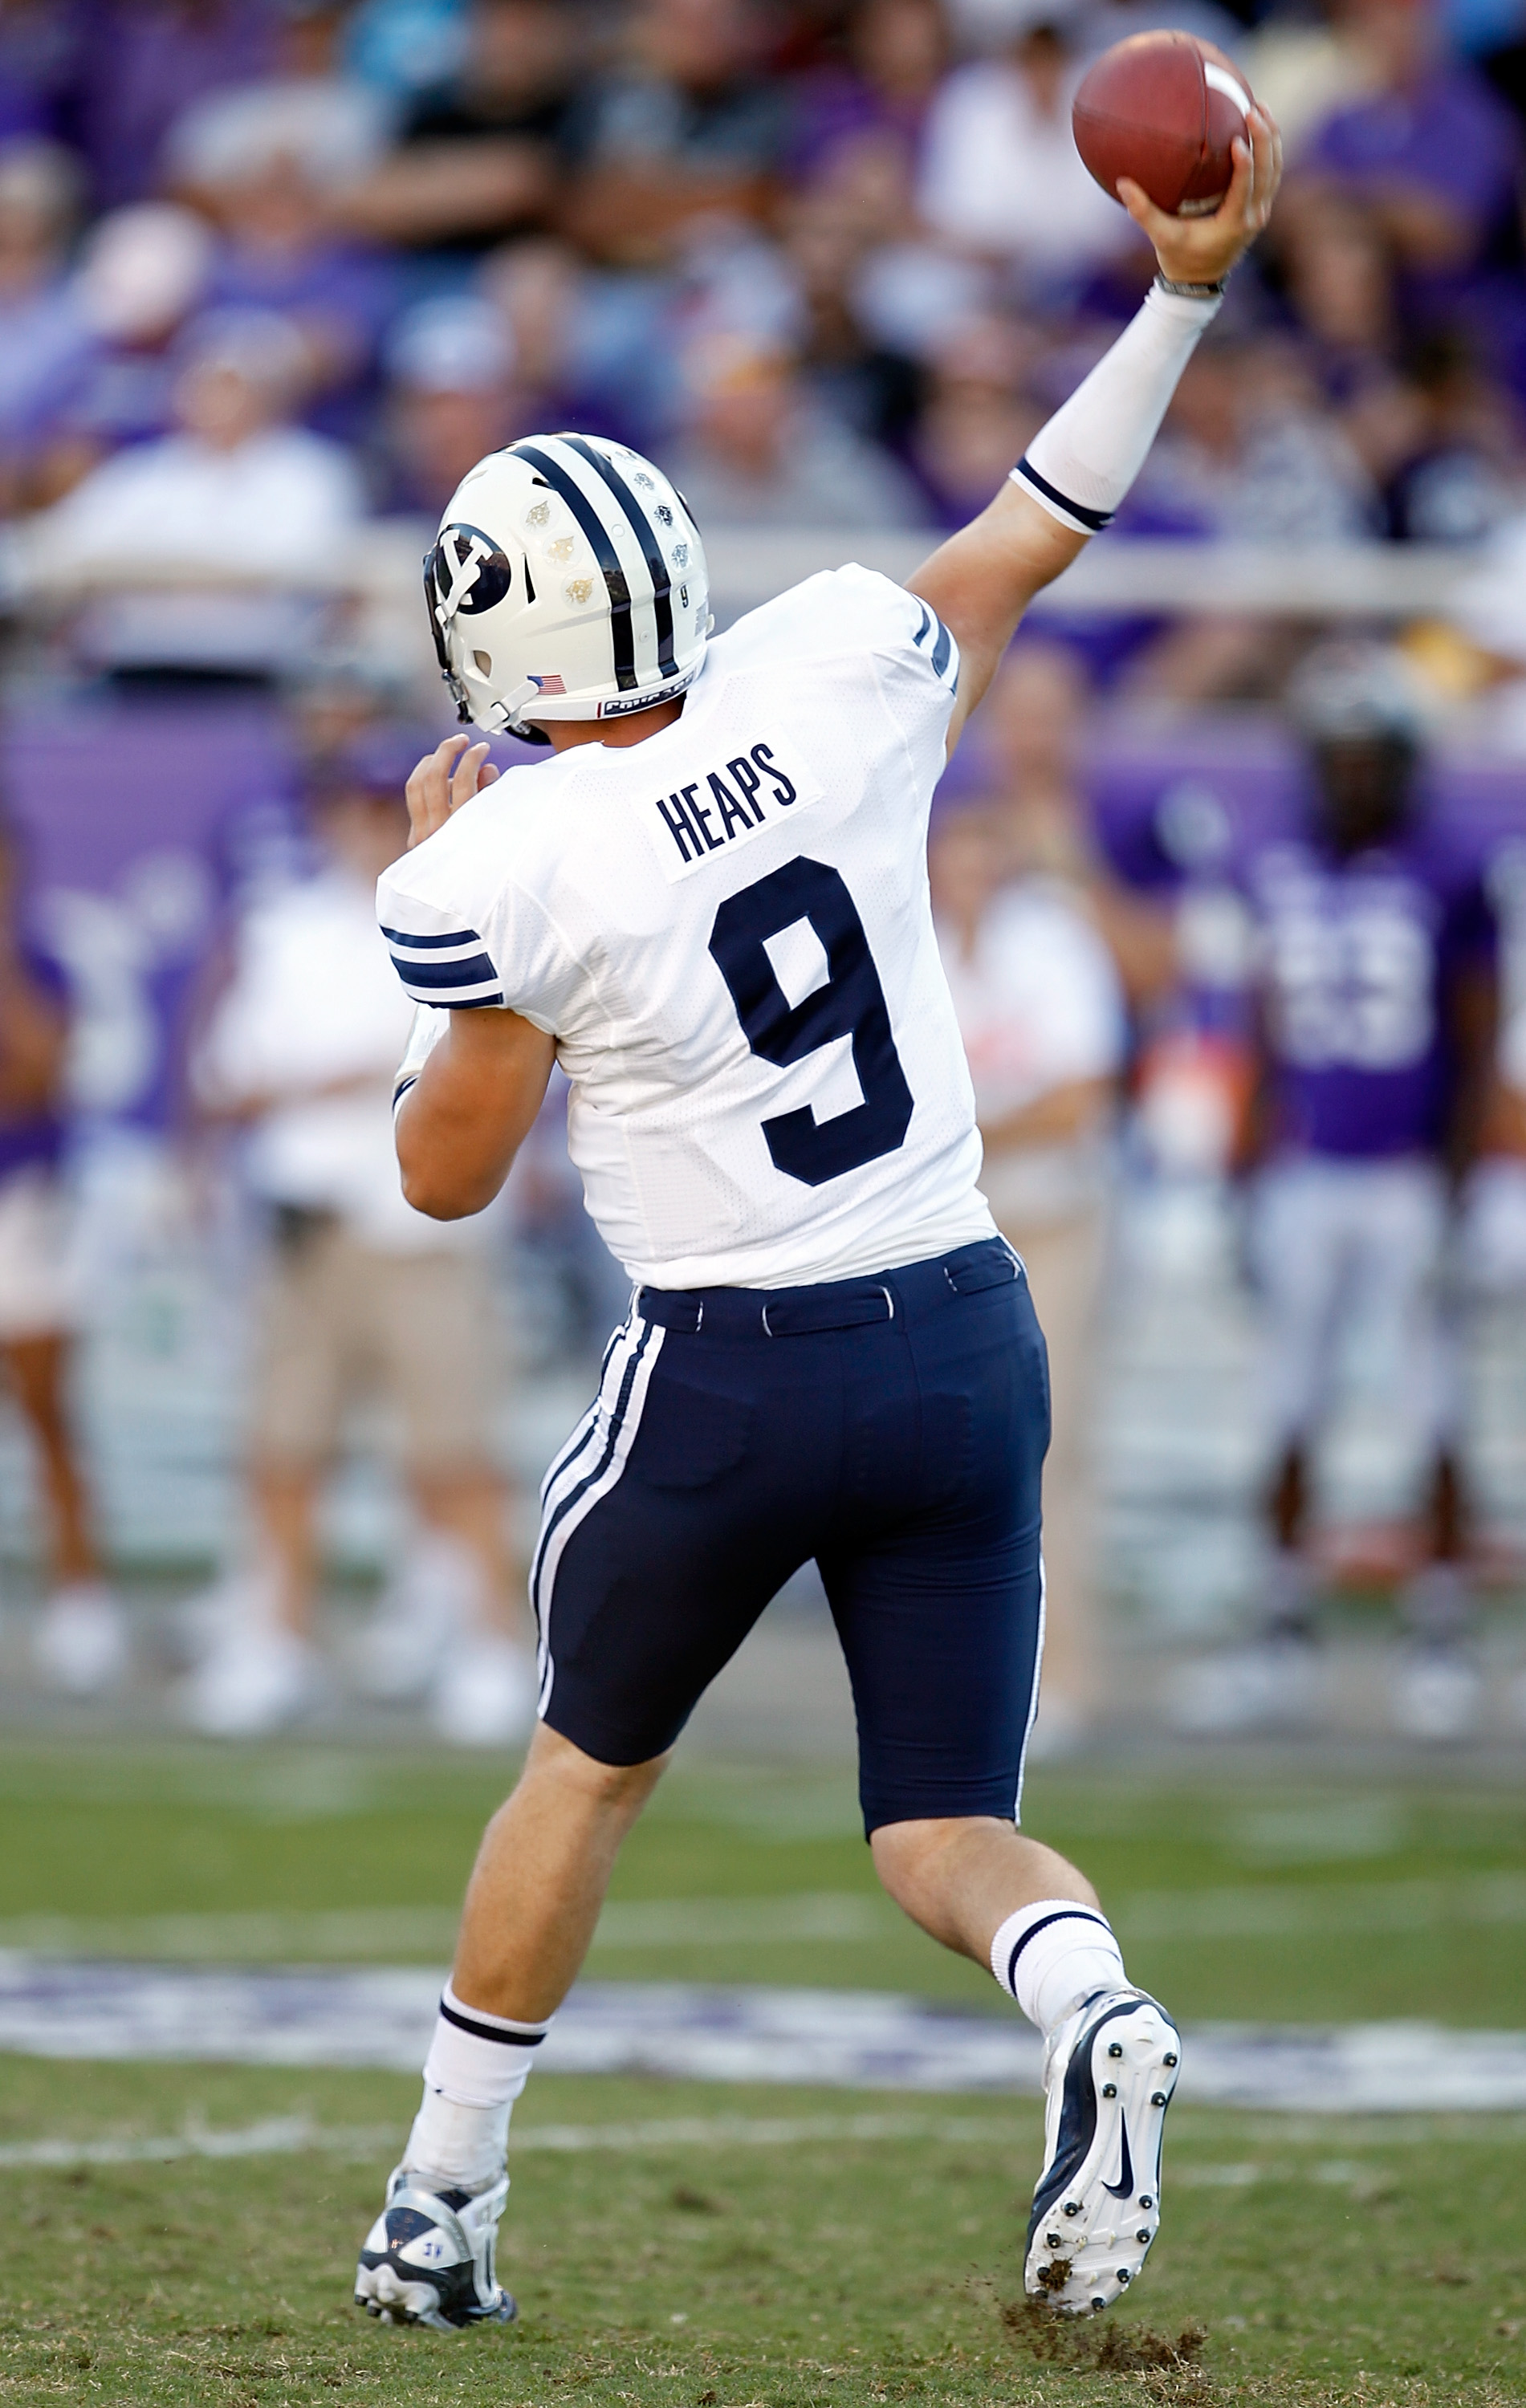 FORT WORTH, TX - OCTOBER 16:  Quarterback Jake Heaps #9 of the BYU Cougars throws a pass against the TCU Horned Frogs at Amon G. Carter Stadium on October 16, 2010 in Fort Worth, Texas. TCU beat BYU 31-3. (Photo by Tom Pennington/Getty Images)